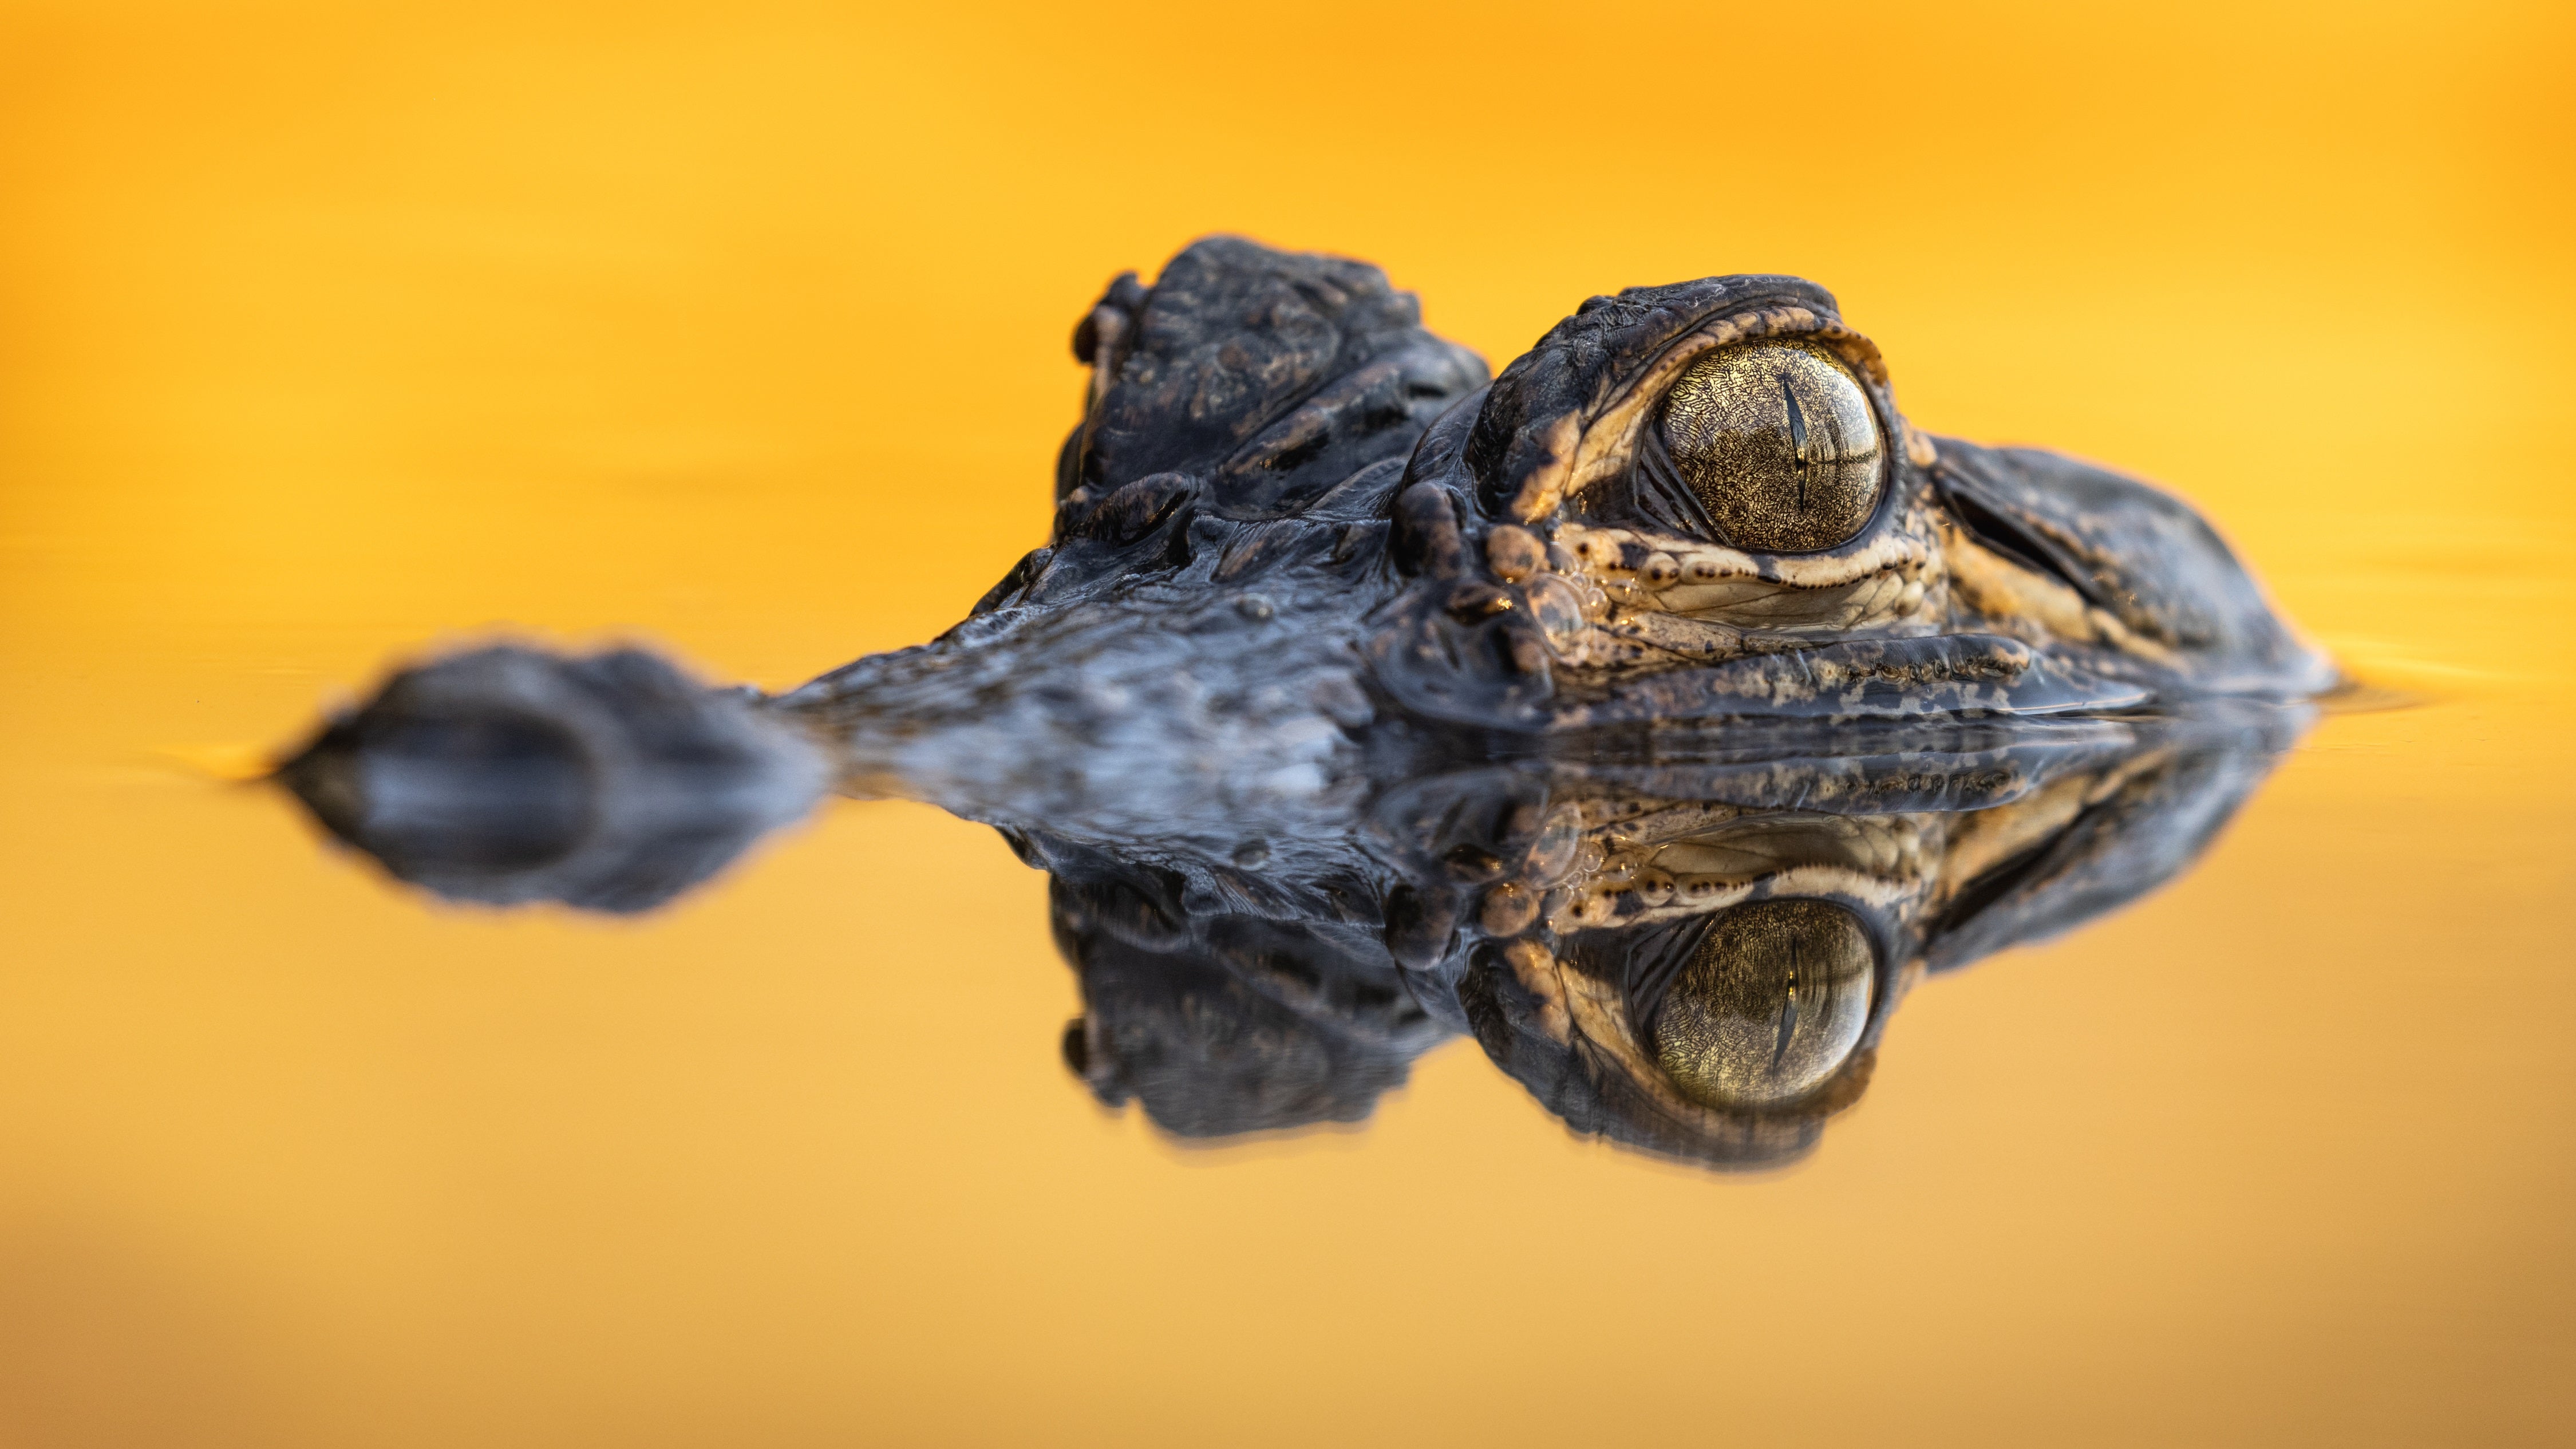 Matthew Dees took first place in the Cold-Blooded Critters Category this year with his image of an American alligator near the Mobile Bay Causeway in South Alabama.